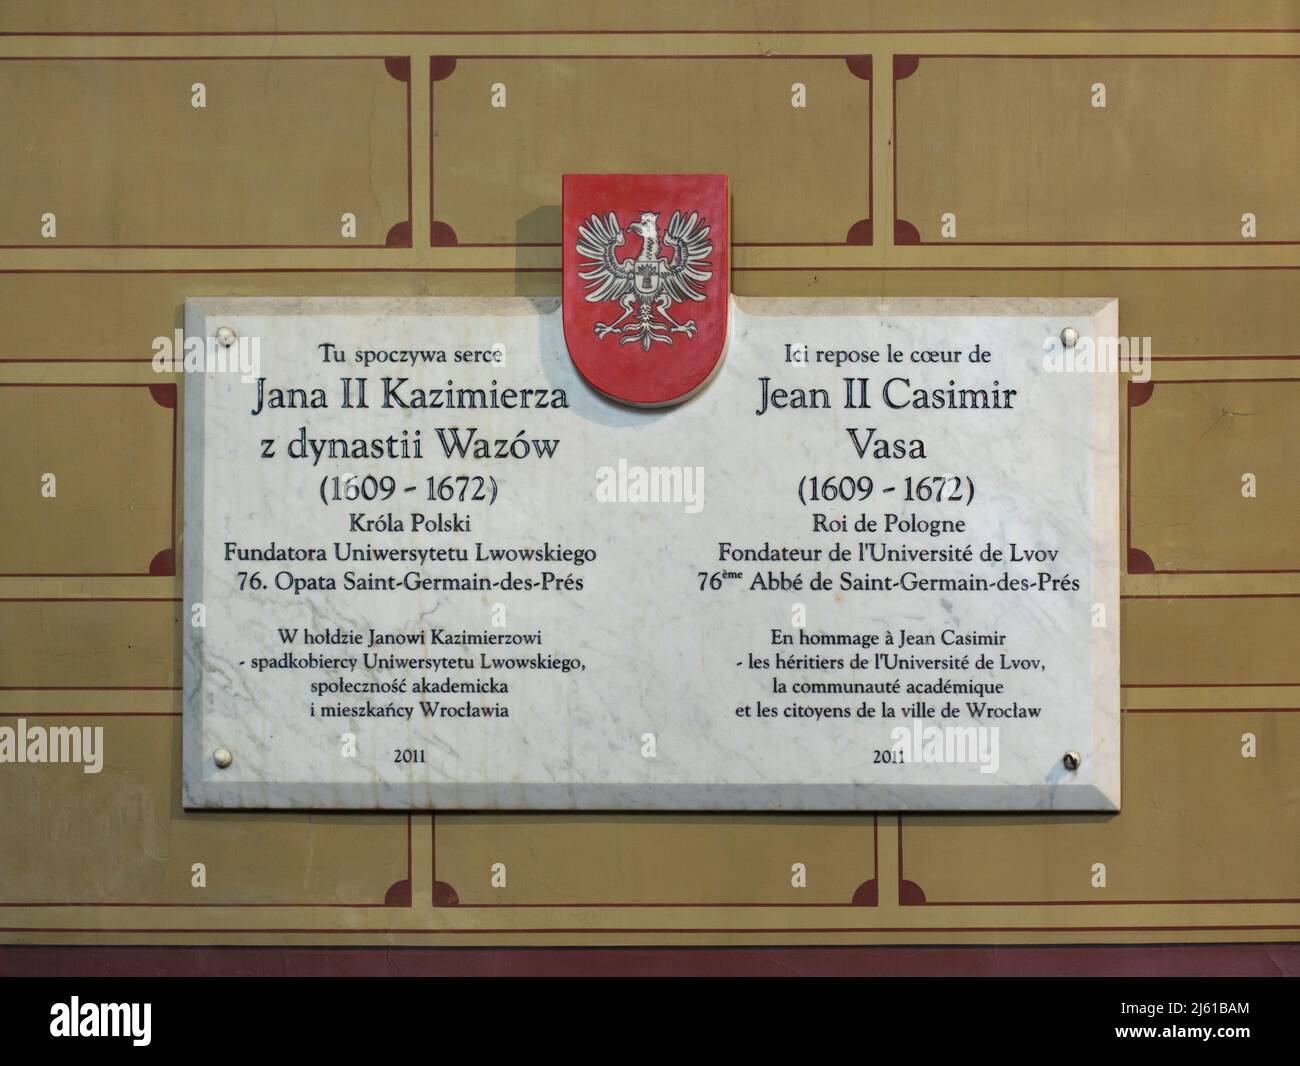 Commemorative plaque devoted to King John II Casimir Vasa of Poland in the Church of Saint-Germain-des-Prés in Paris, France. After the abdication the former king served as the abbot of Abbey of Saint-Germain-des-Prés and his heart is buried in this church. Stock Photo